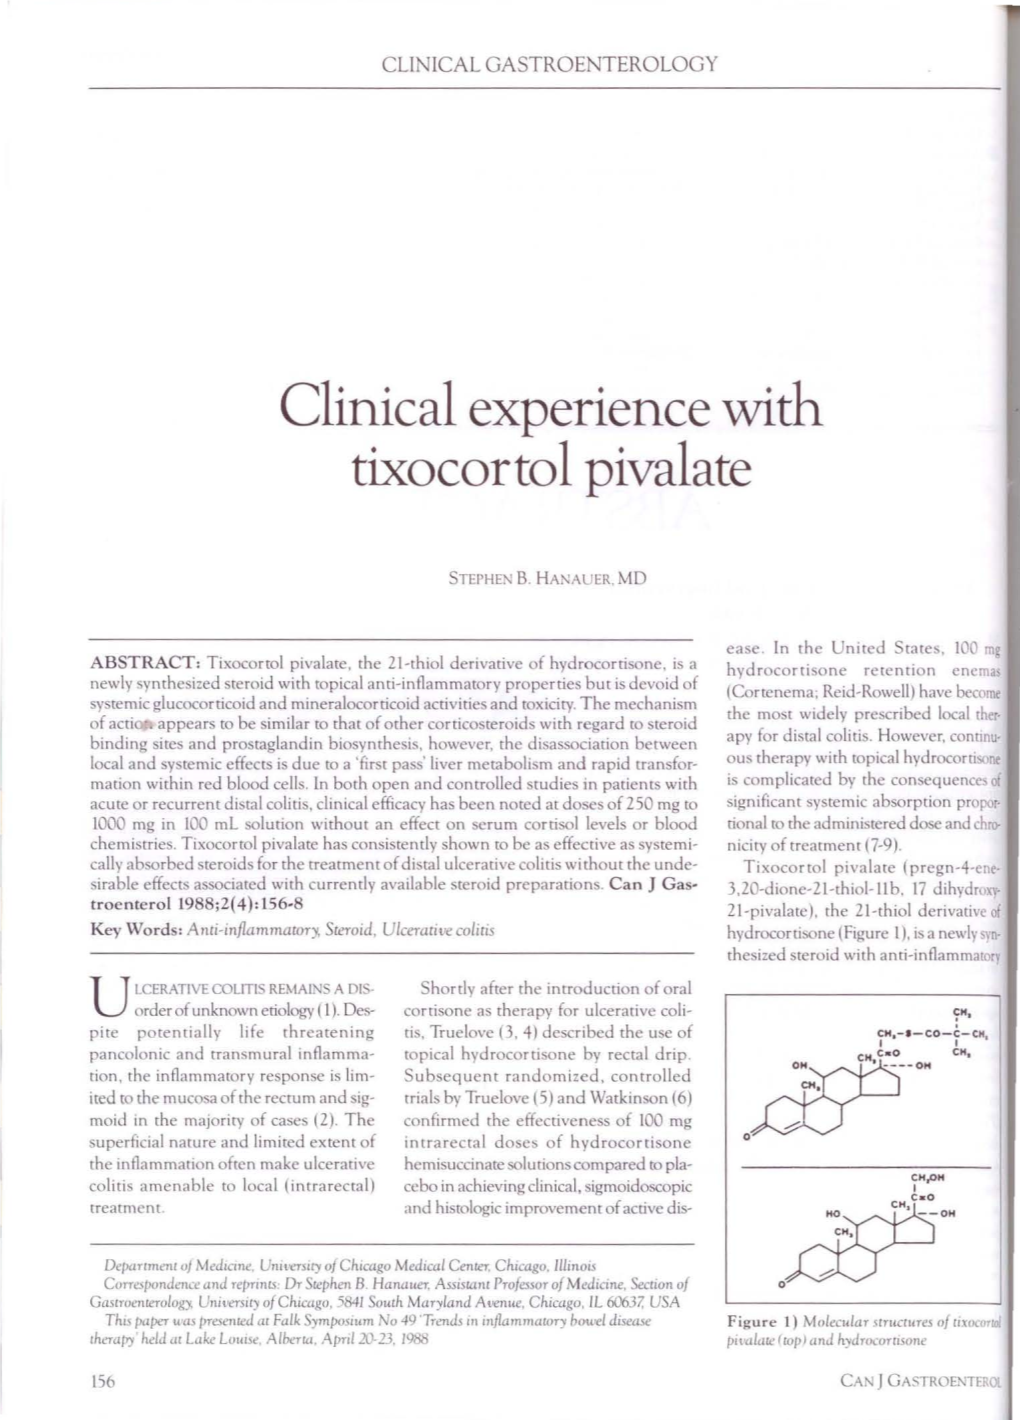 Clinical Experience with Tixocortol Pivalate